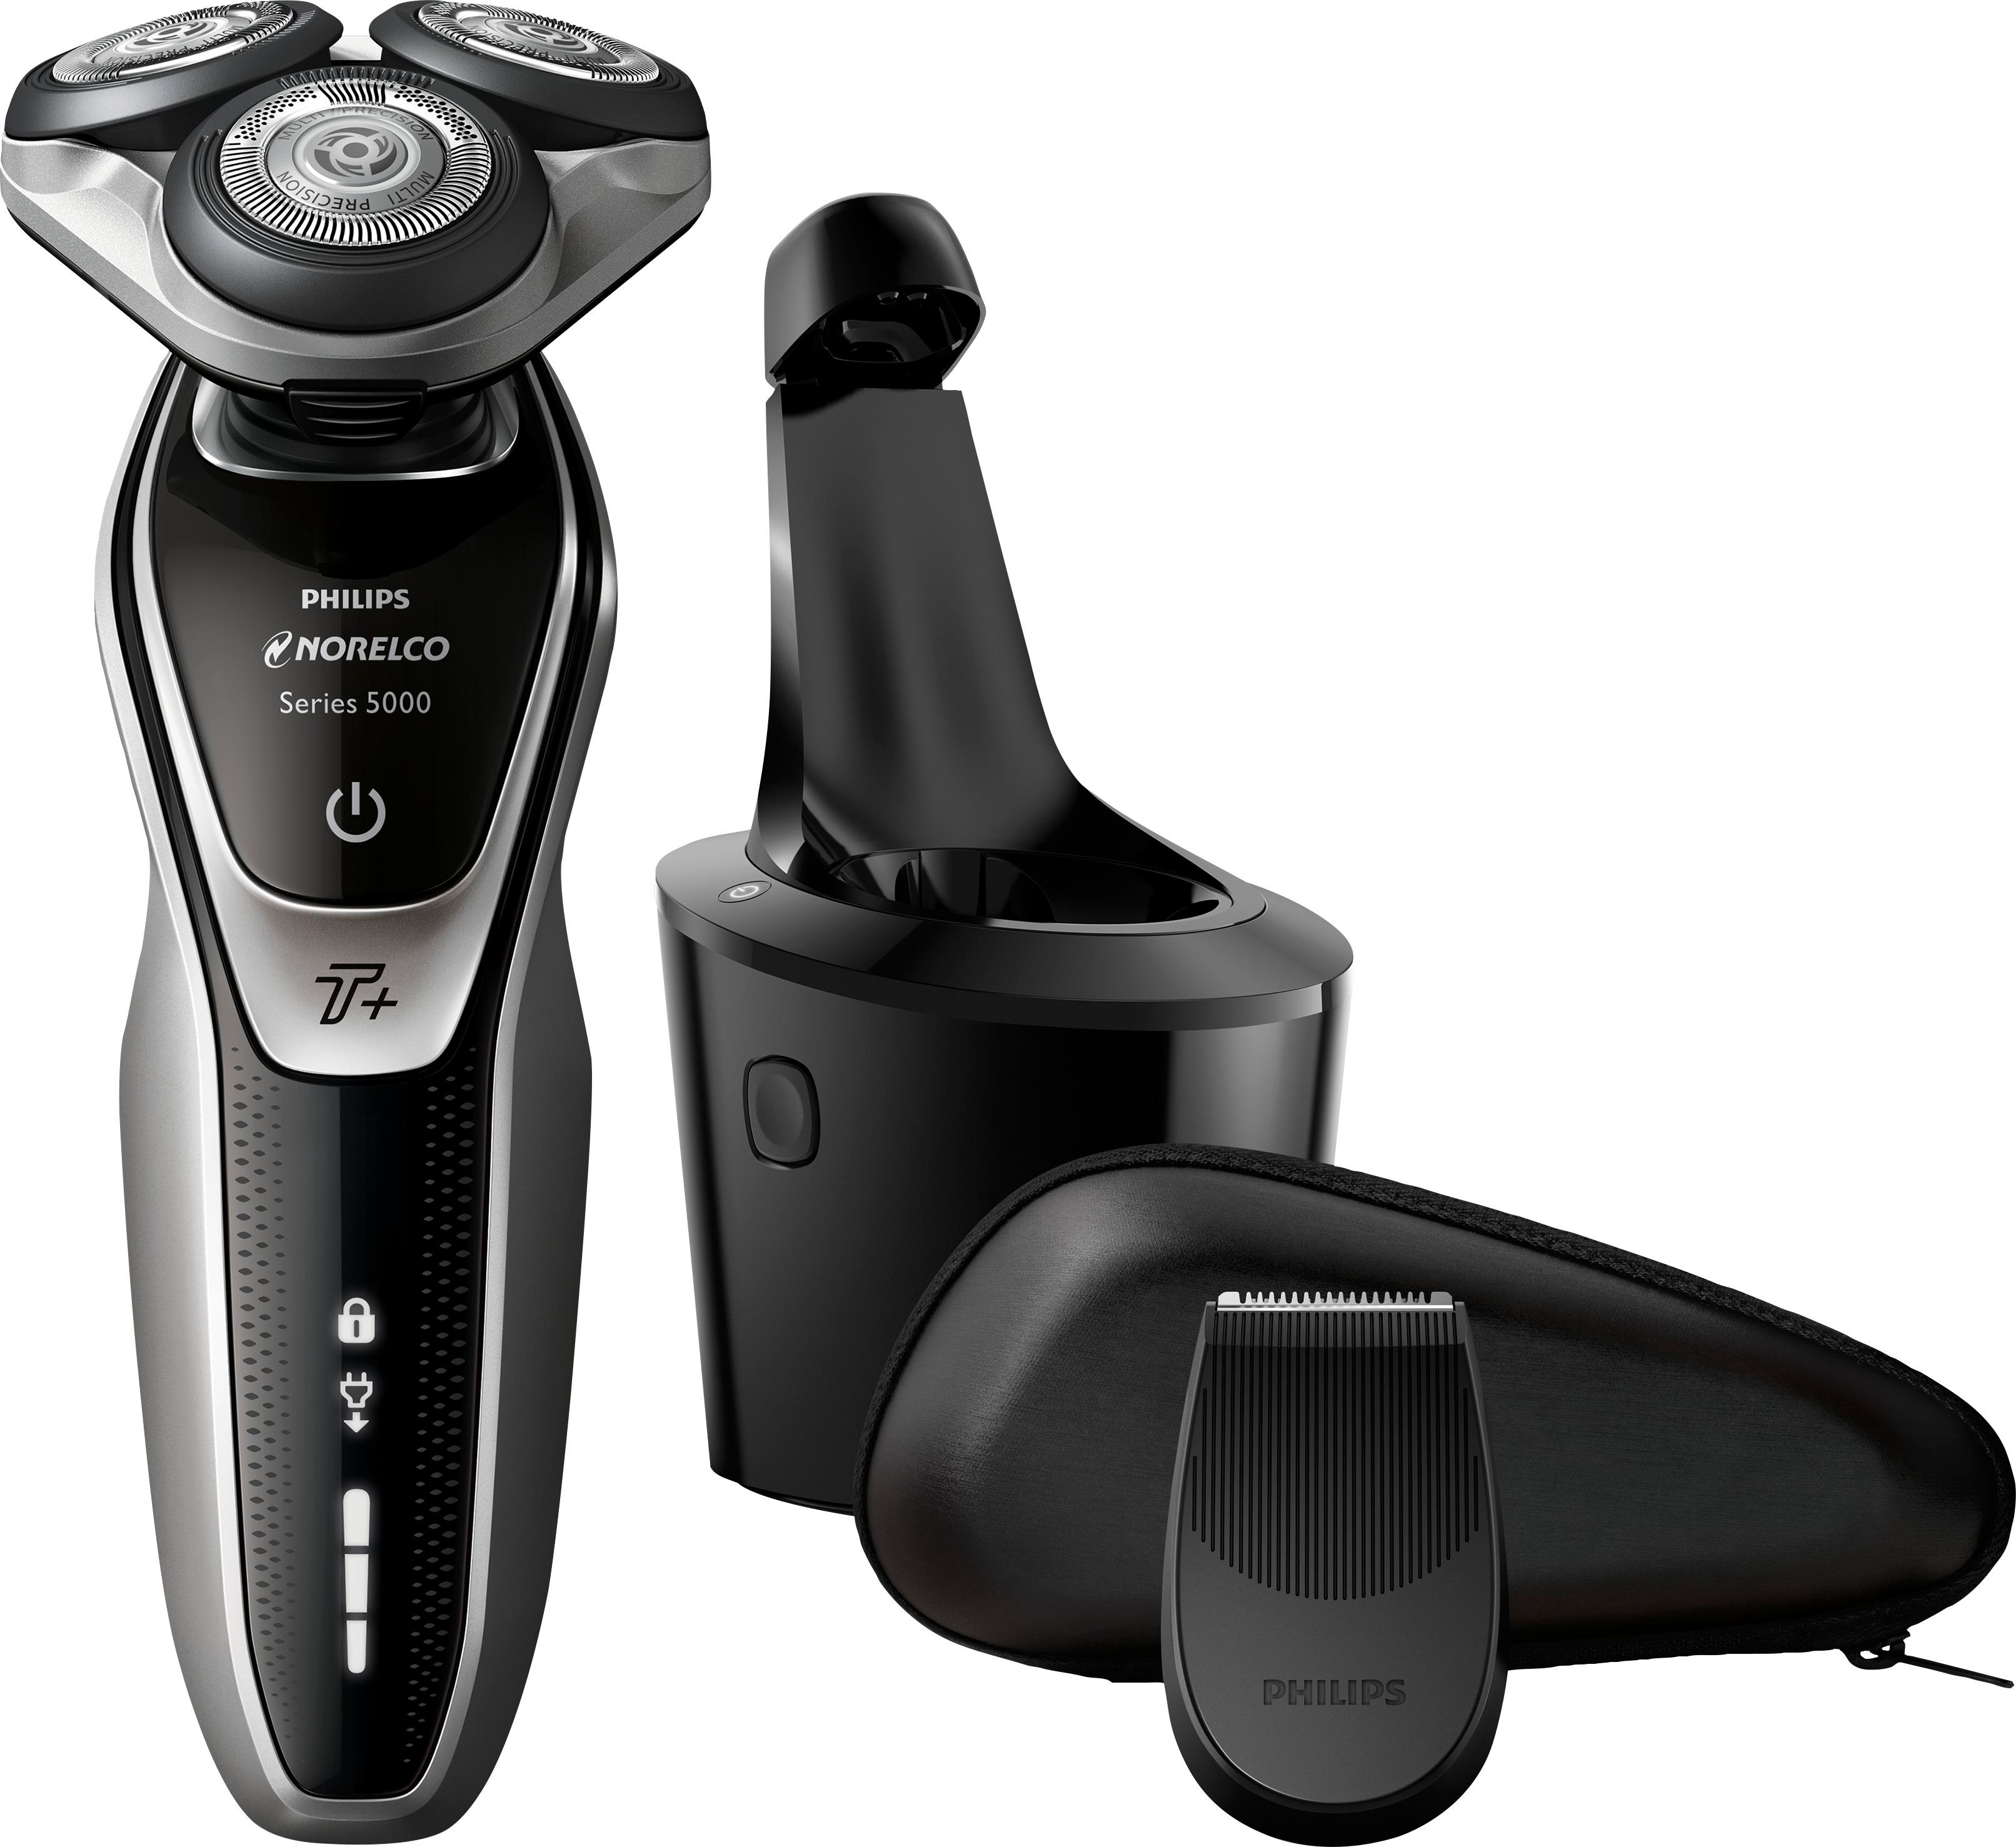 philips fast shave series 5000